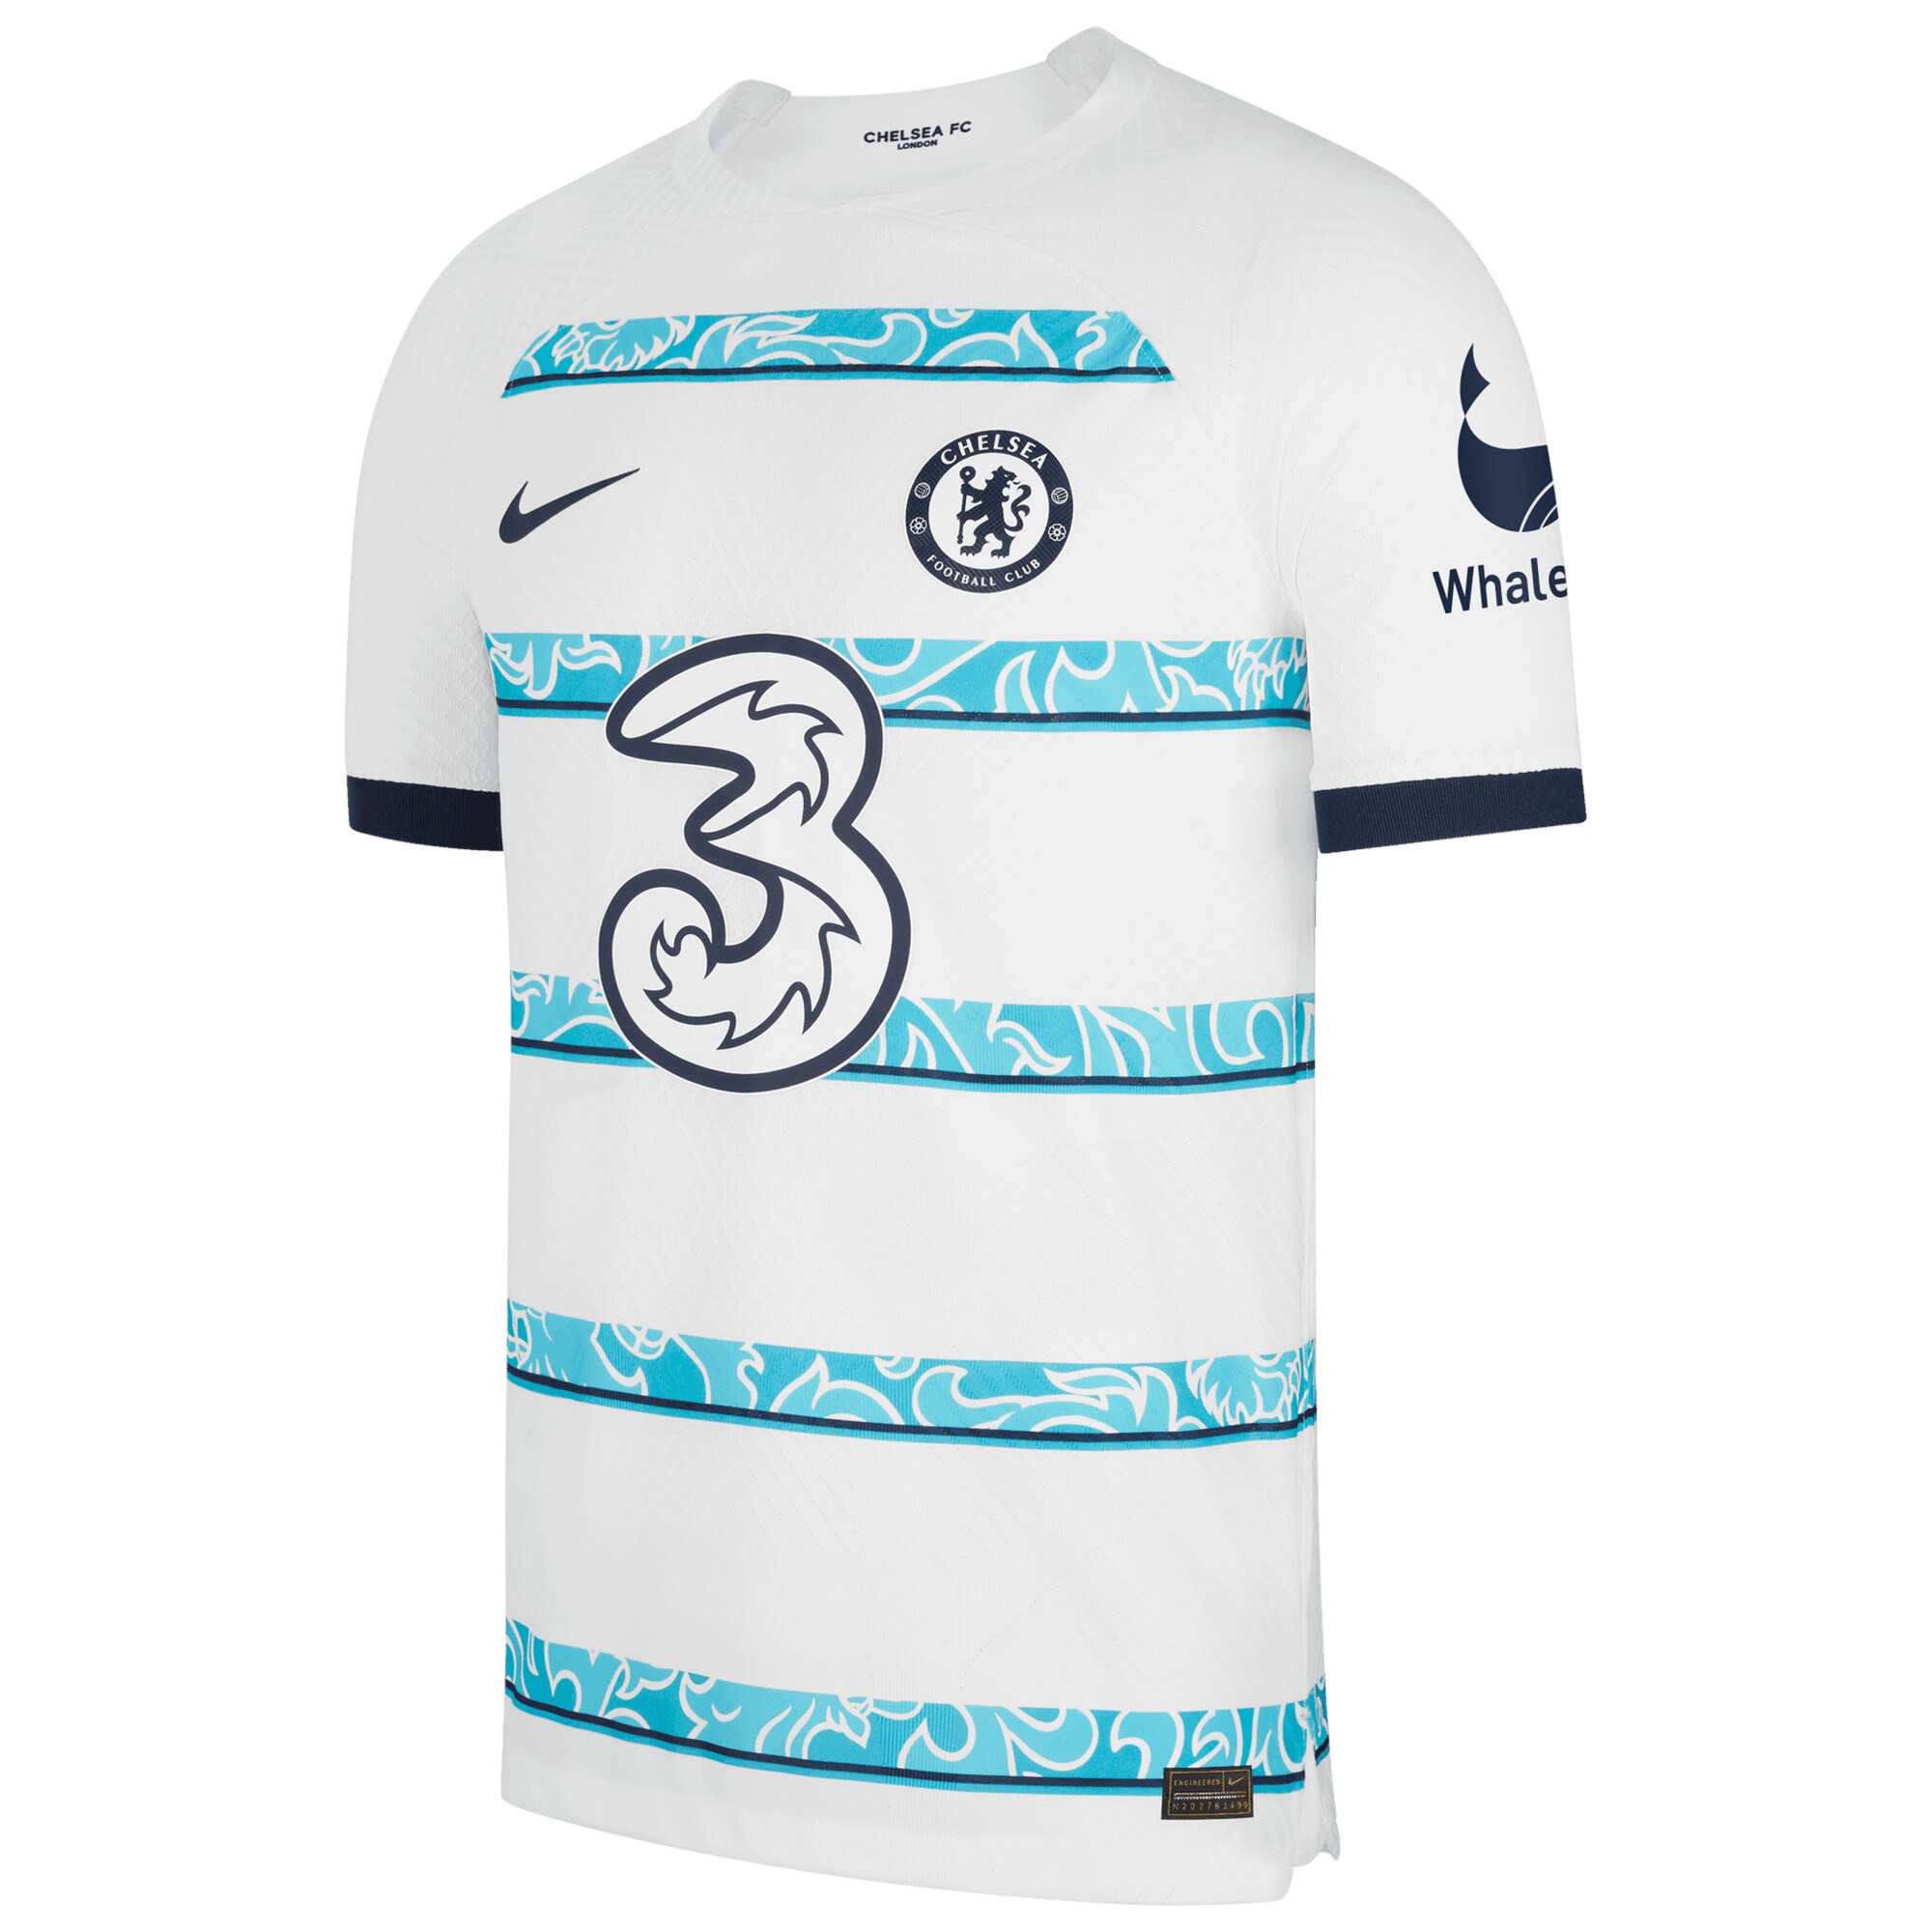 Chelsea Away Vapor Match Shirt 2022-23 with Pulisic 10 printing